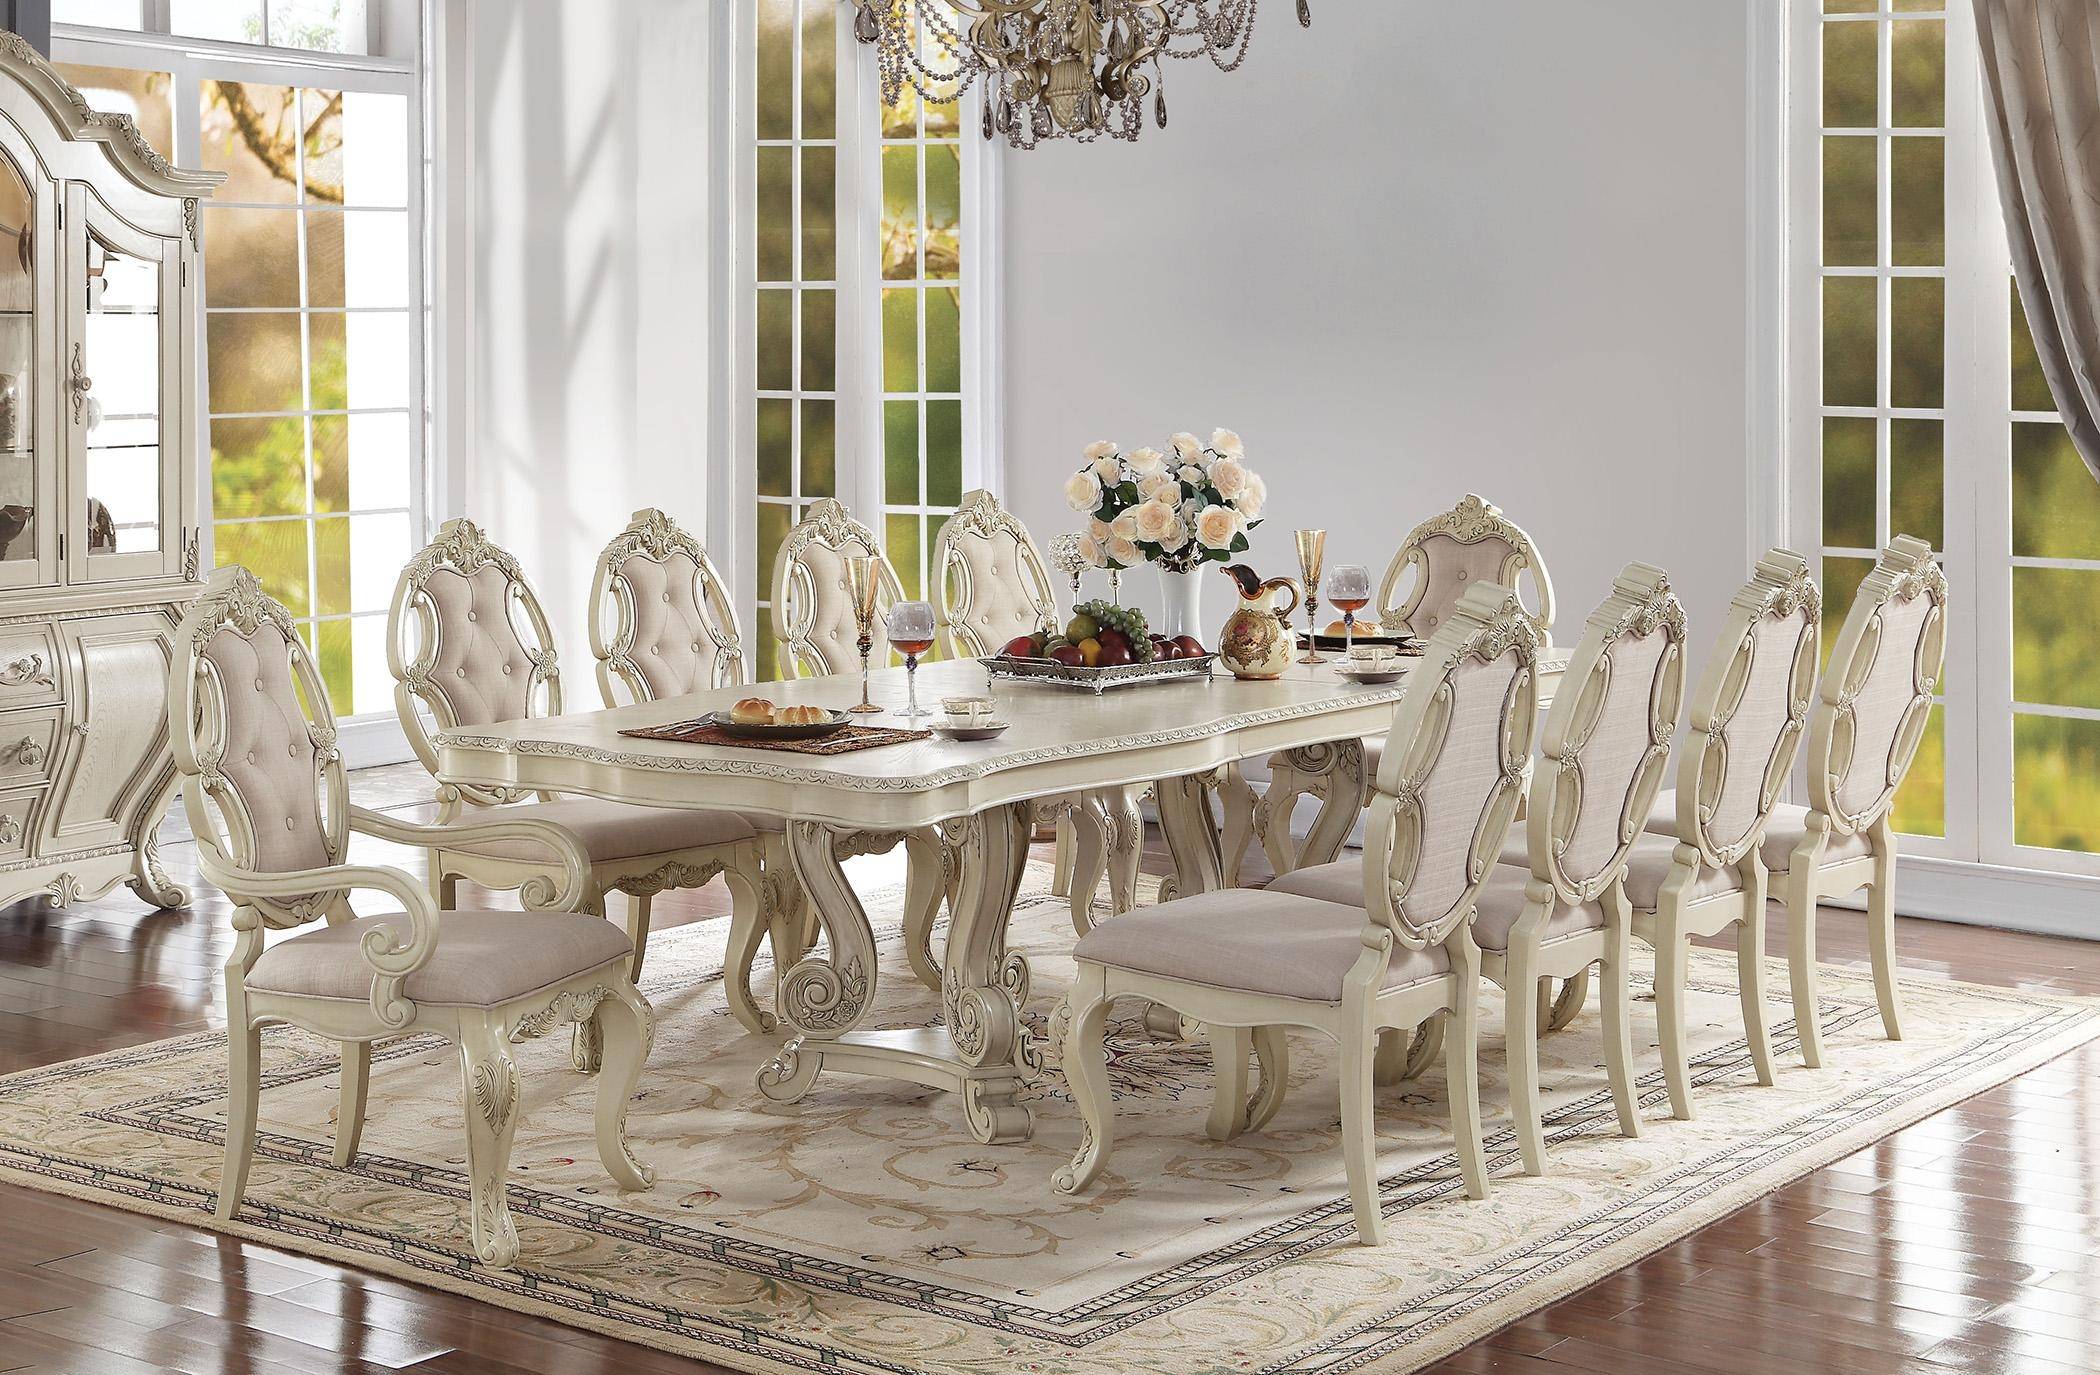 Acme Ragenardus 61280 Dining Table Set, Antique White Dining Room Table And Chairs Set